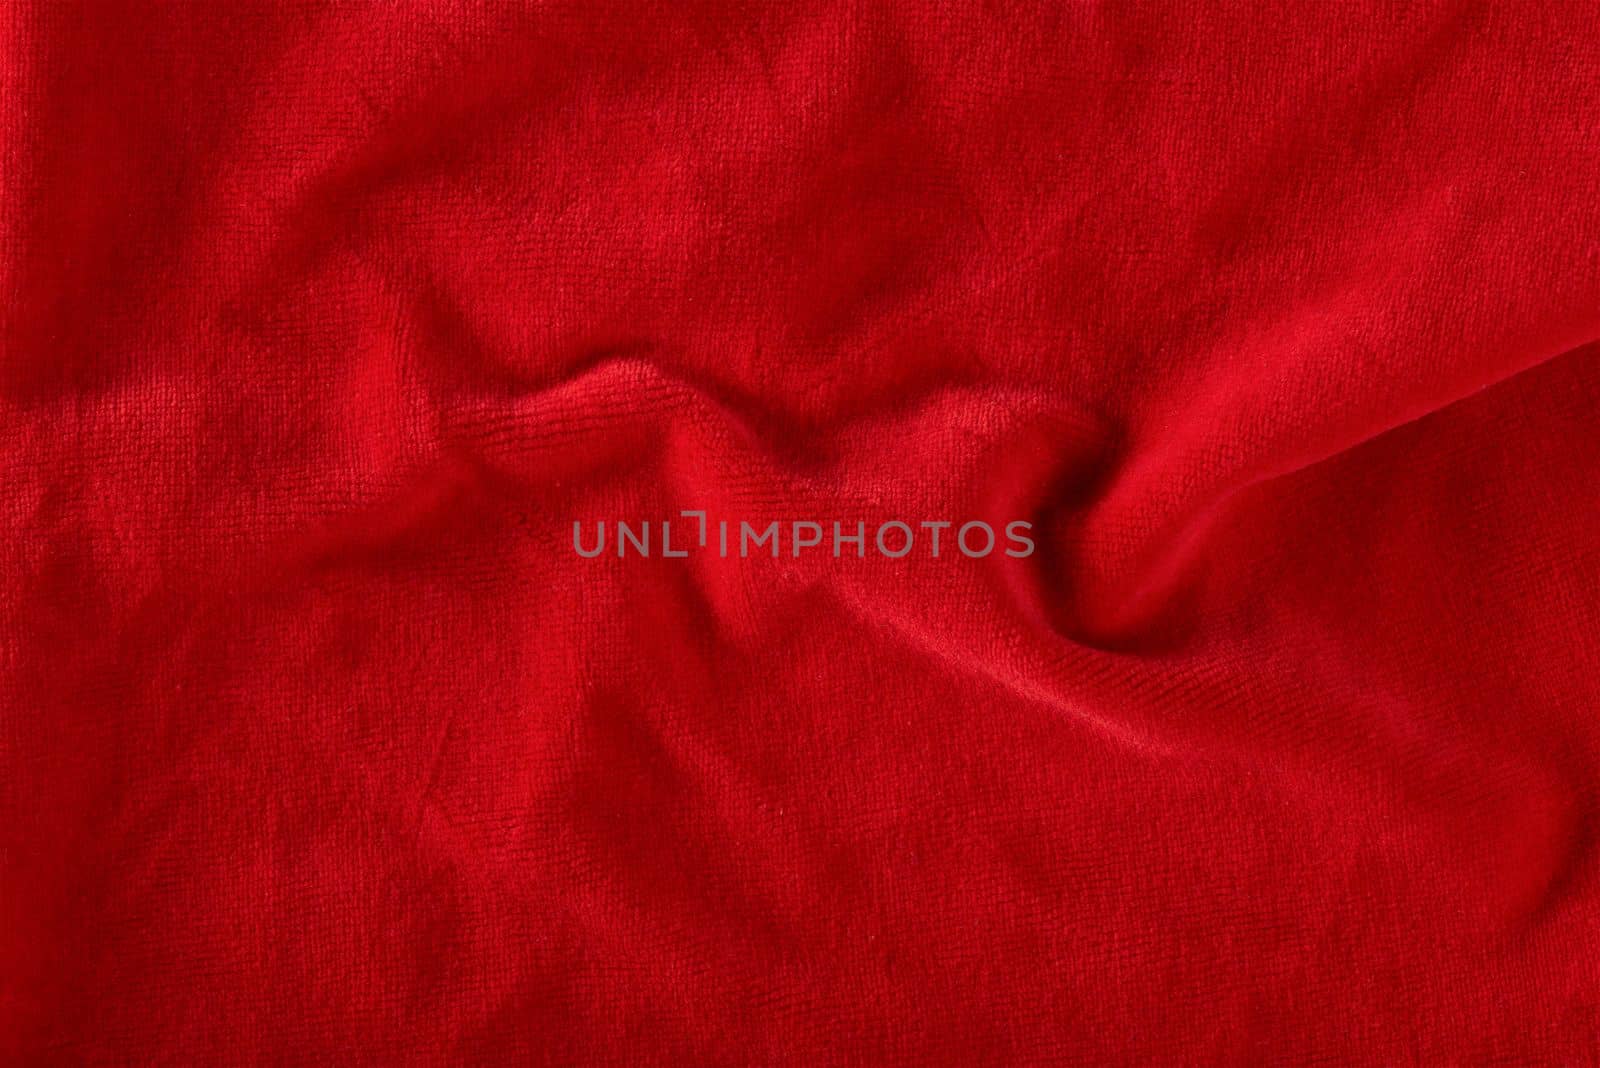 Red velvet texture for postcard or background for design. Red background for Christmas theme or Valentine's day, high quality, large format. Abstract texture of draped red velvet.